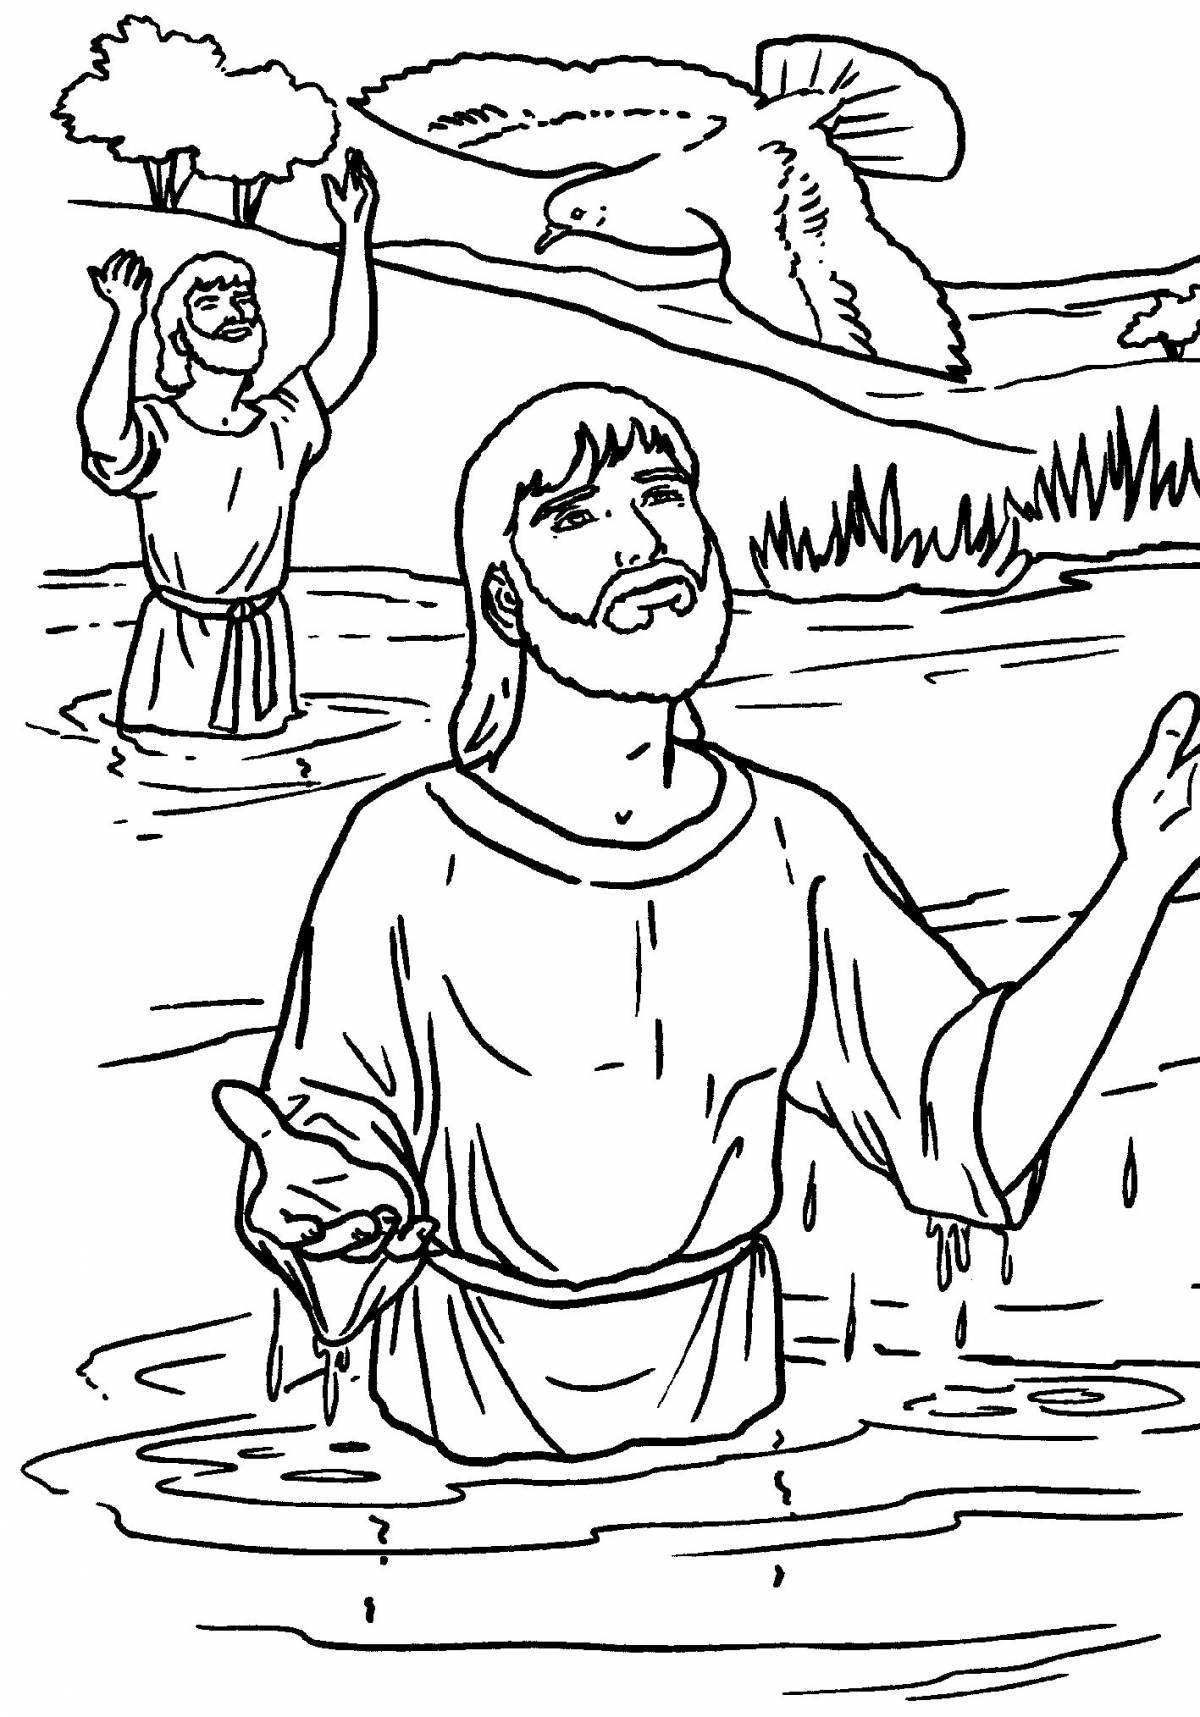 Glorious baptism coloring book for orthodox children